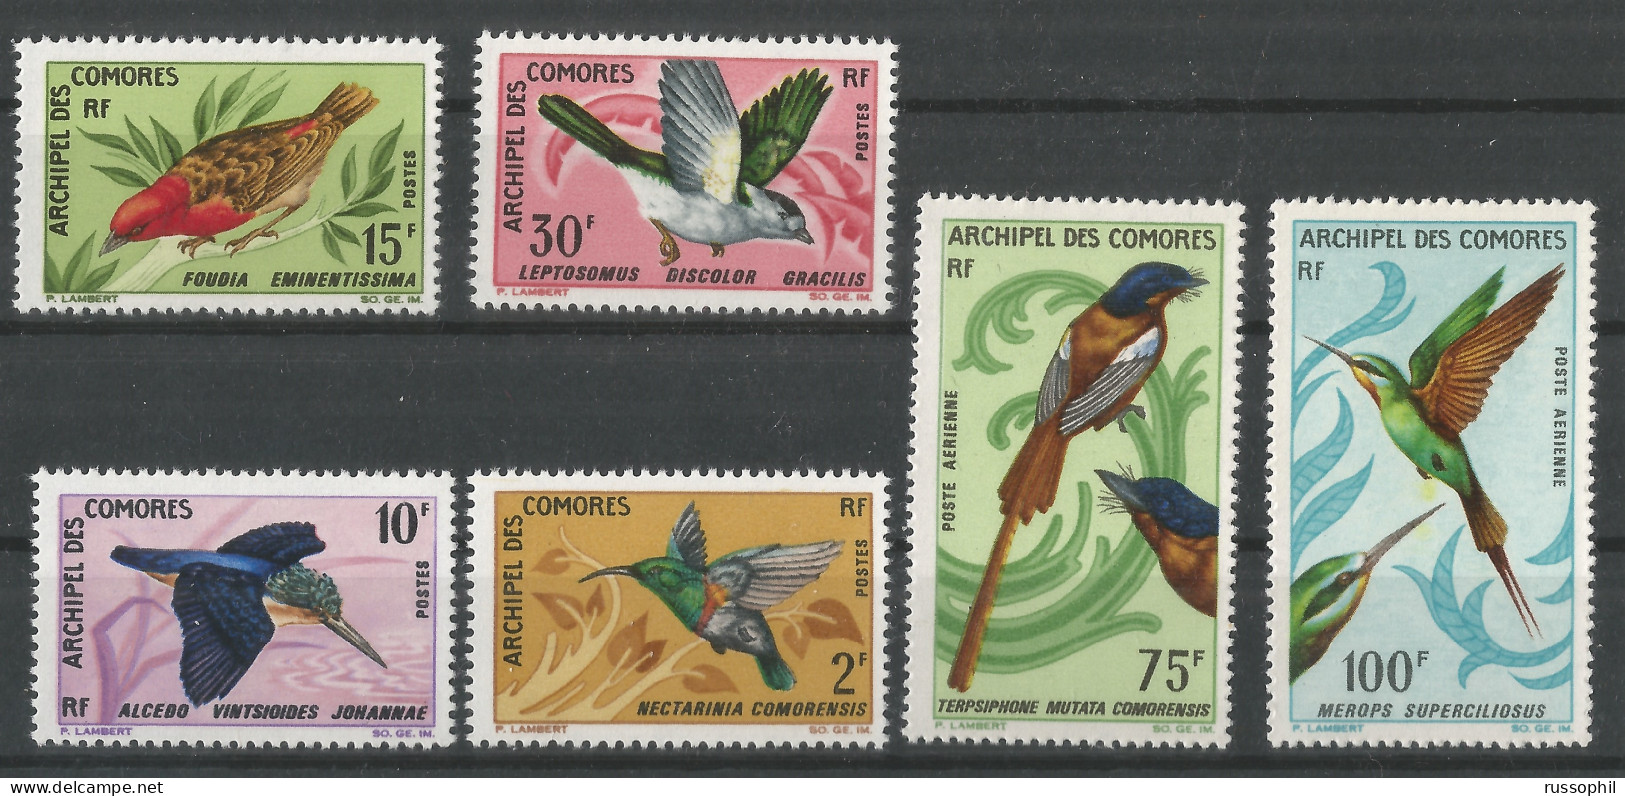 COMORES - OISEAUX - BIRDS -  Yv. #41 TO Yv. #44 AND Yv. #PA20 AND Yv. #PA21 -  (**/MNH) - 1967 - Ungebraucht